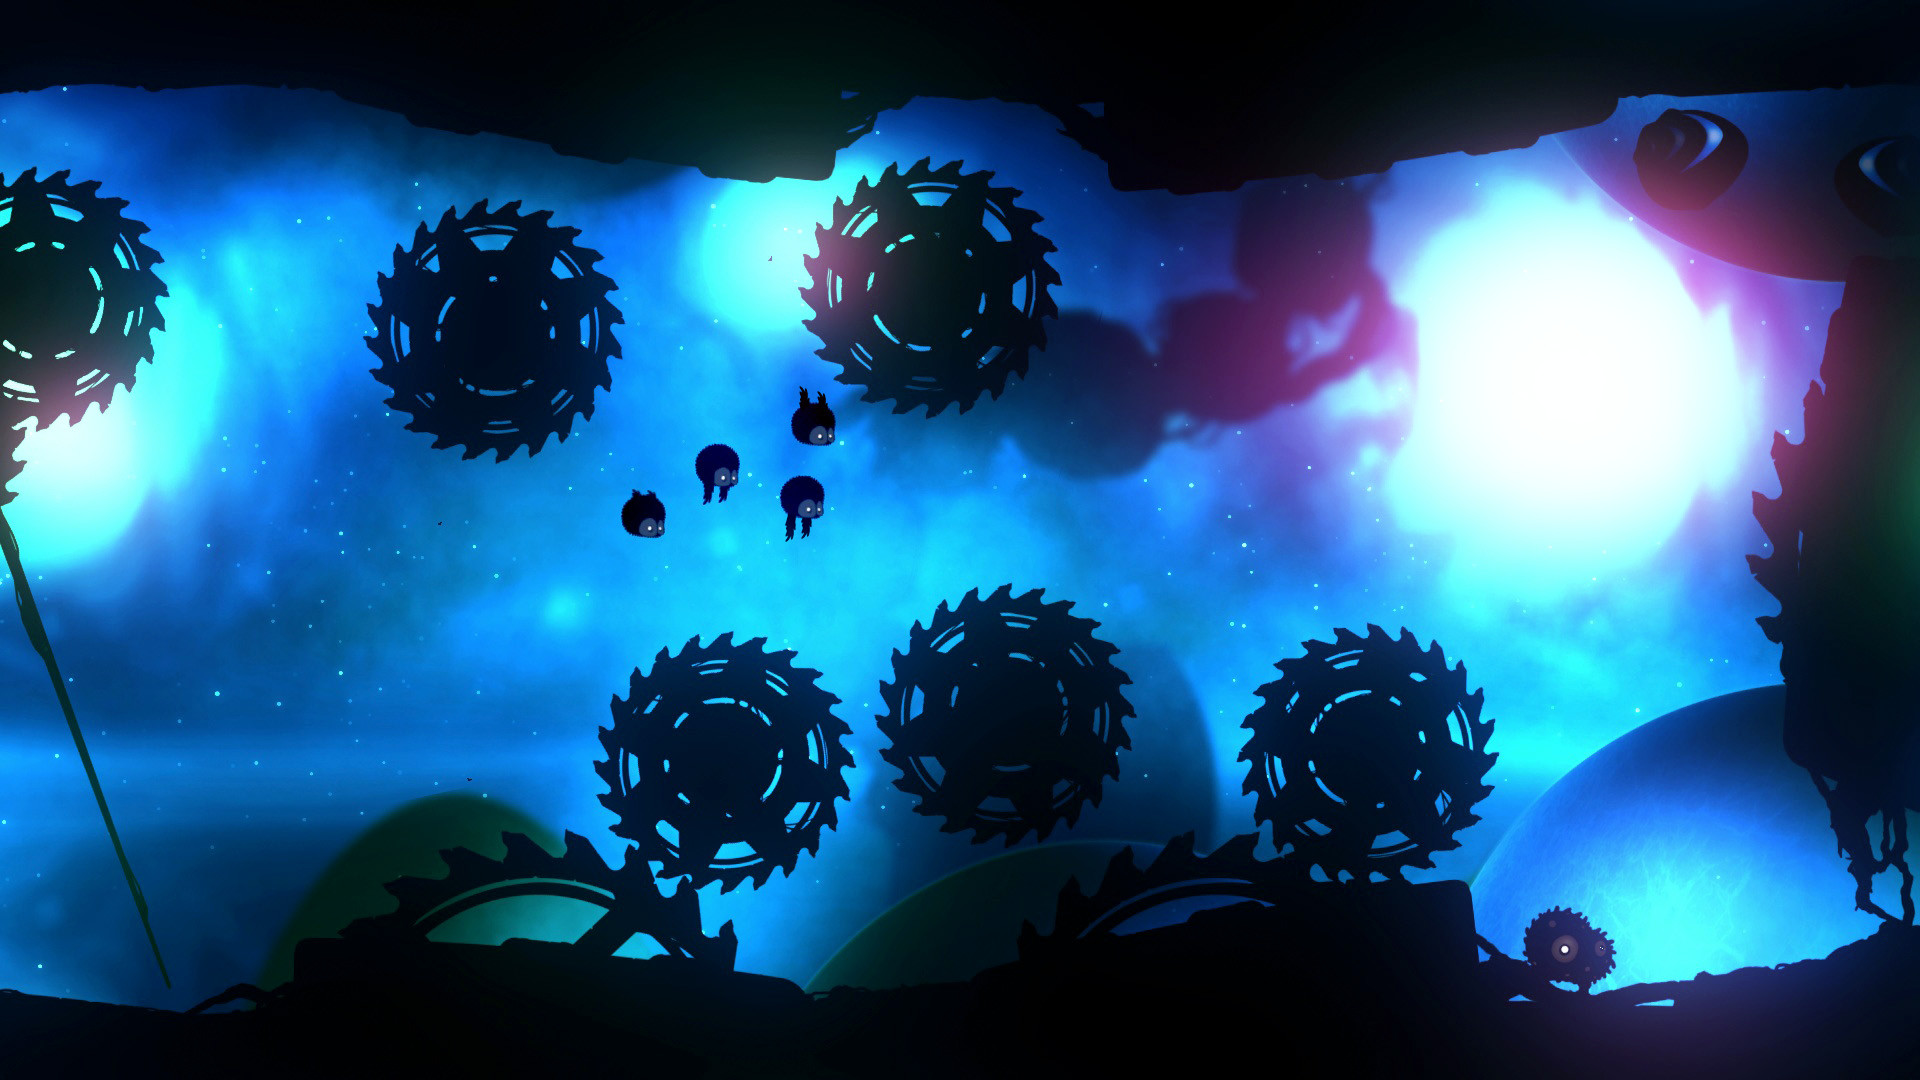 BADLAND: Game of the Year Edition on Steam